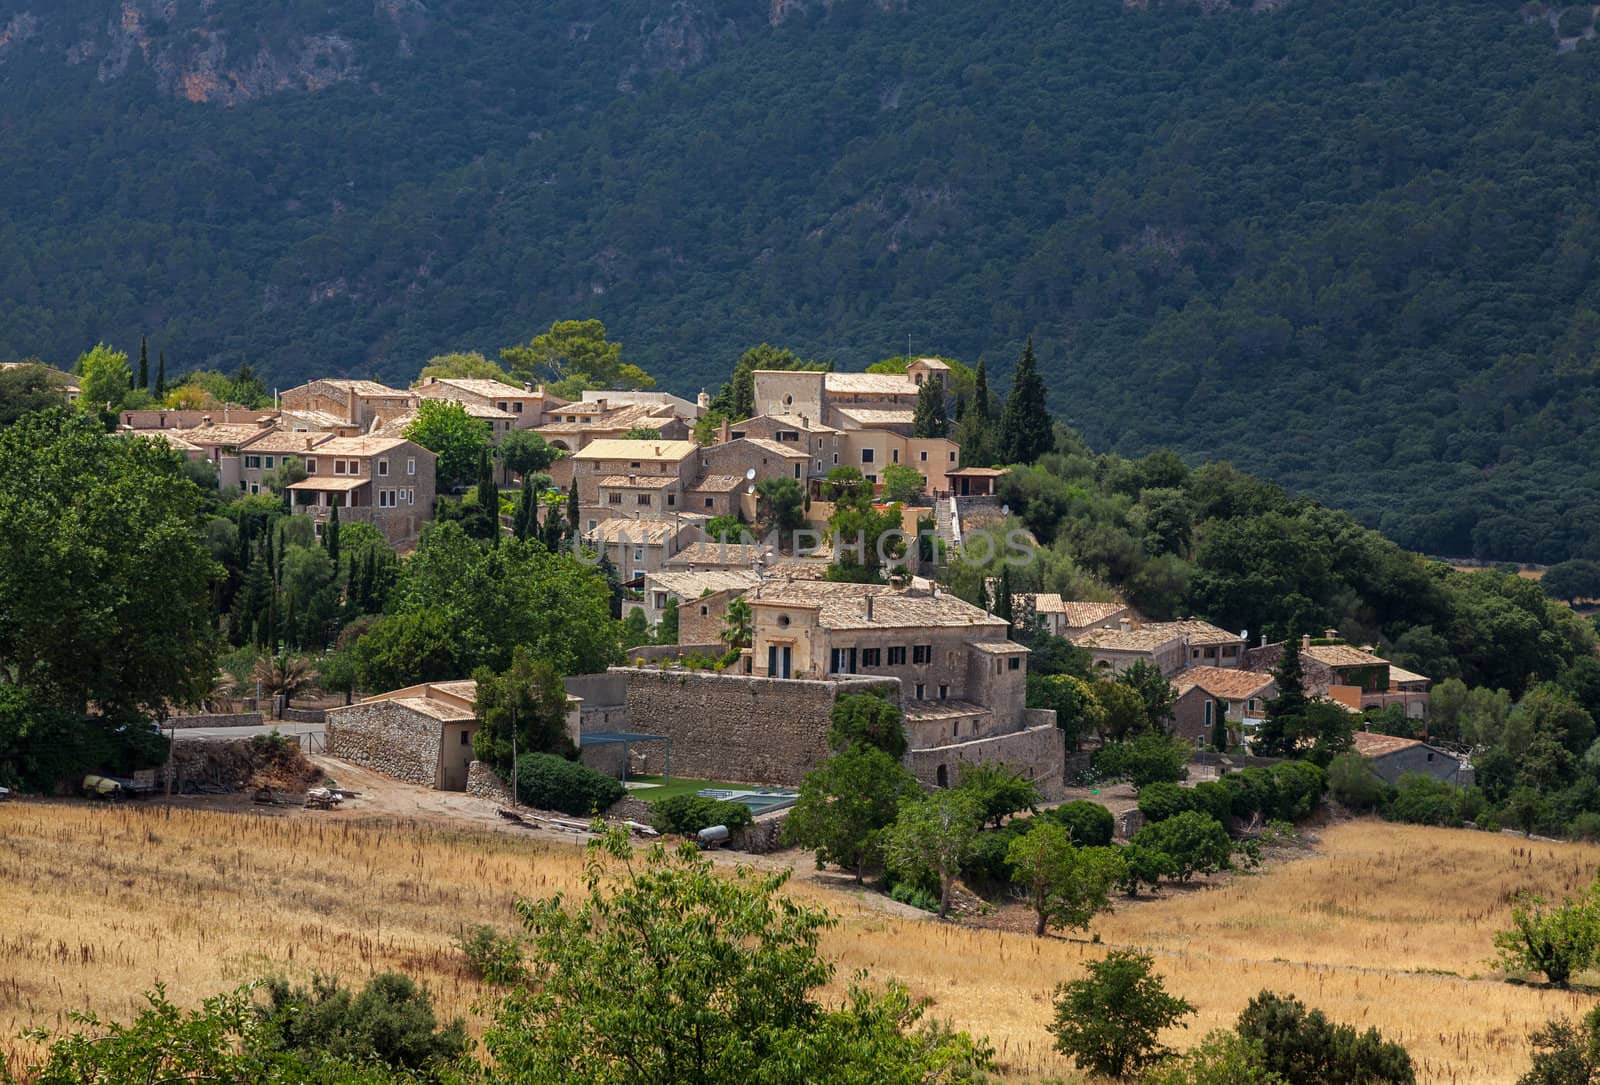 Image of a specific mountainous Spanish town located in Mallorca in Balearic Islands. The town is Orient.